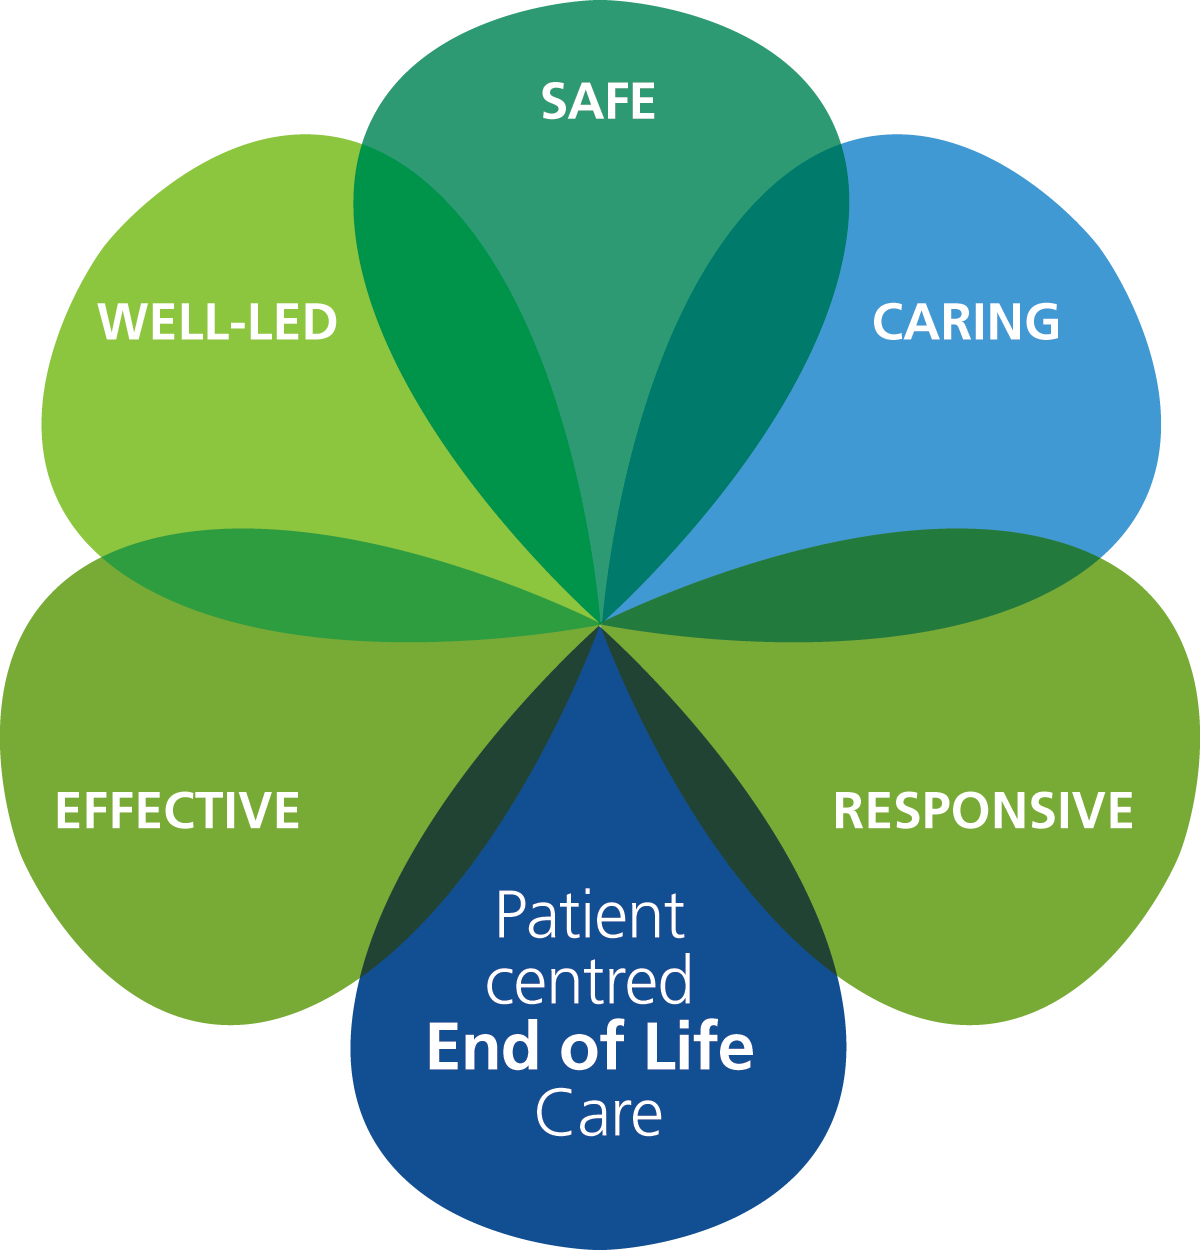 End of Life Care Graphic - Safe, Caring, Responsive, Patient centred EOLC, Effective, Well-led